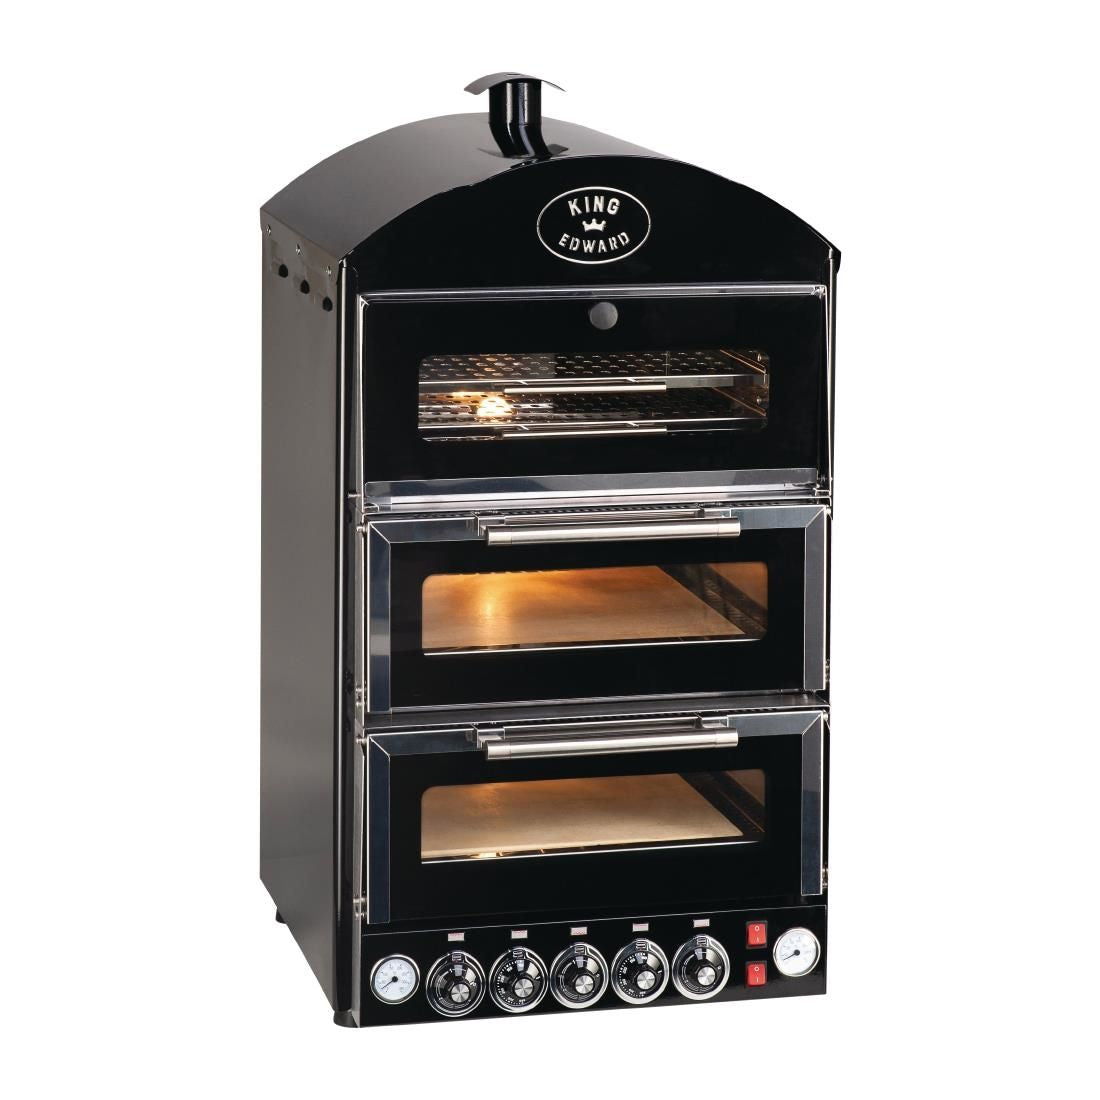 DY473 King Edward Pizza King Oven and Warmer PK2W/BLK JD Catering Equipment Solutions Ltd